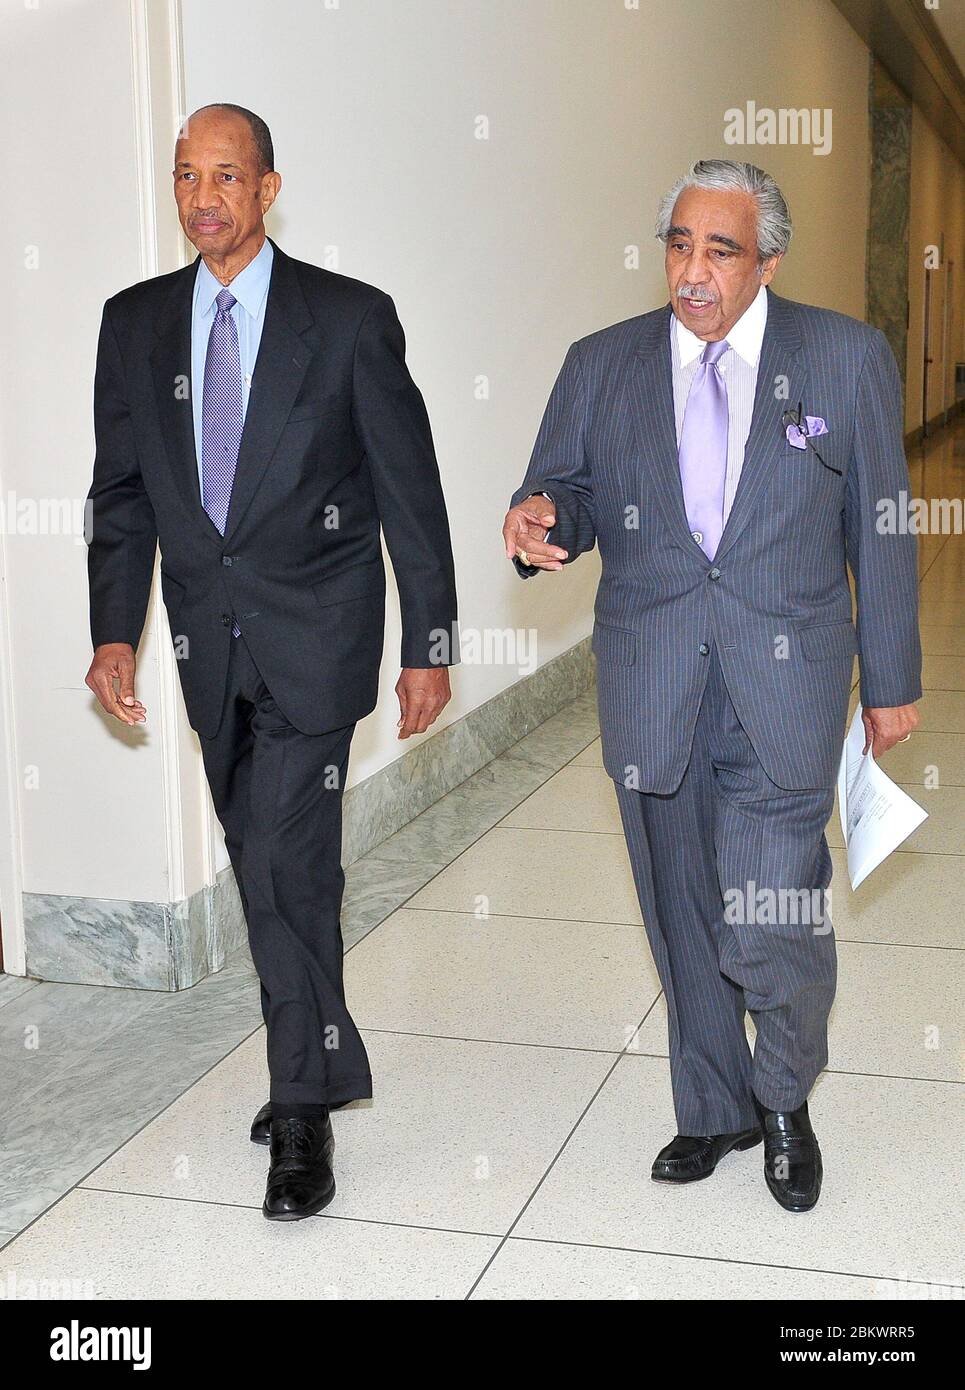 United States Representative Charlie Rangel (Democrat of New York) talks with his Chief of Staff, George Henry, as he departs from his Capitol Hill office on Tuesday, November 30, 2010.Credit: Ron Sachs / CNP  (RESTRICTION: NO New York or New Jersey Newspapers or newspapers within a 75 mile radius of New York City) / MediaPunch Stock Photo